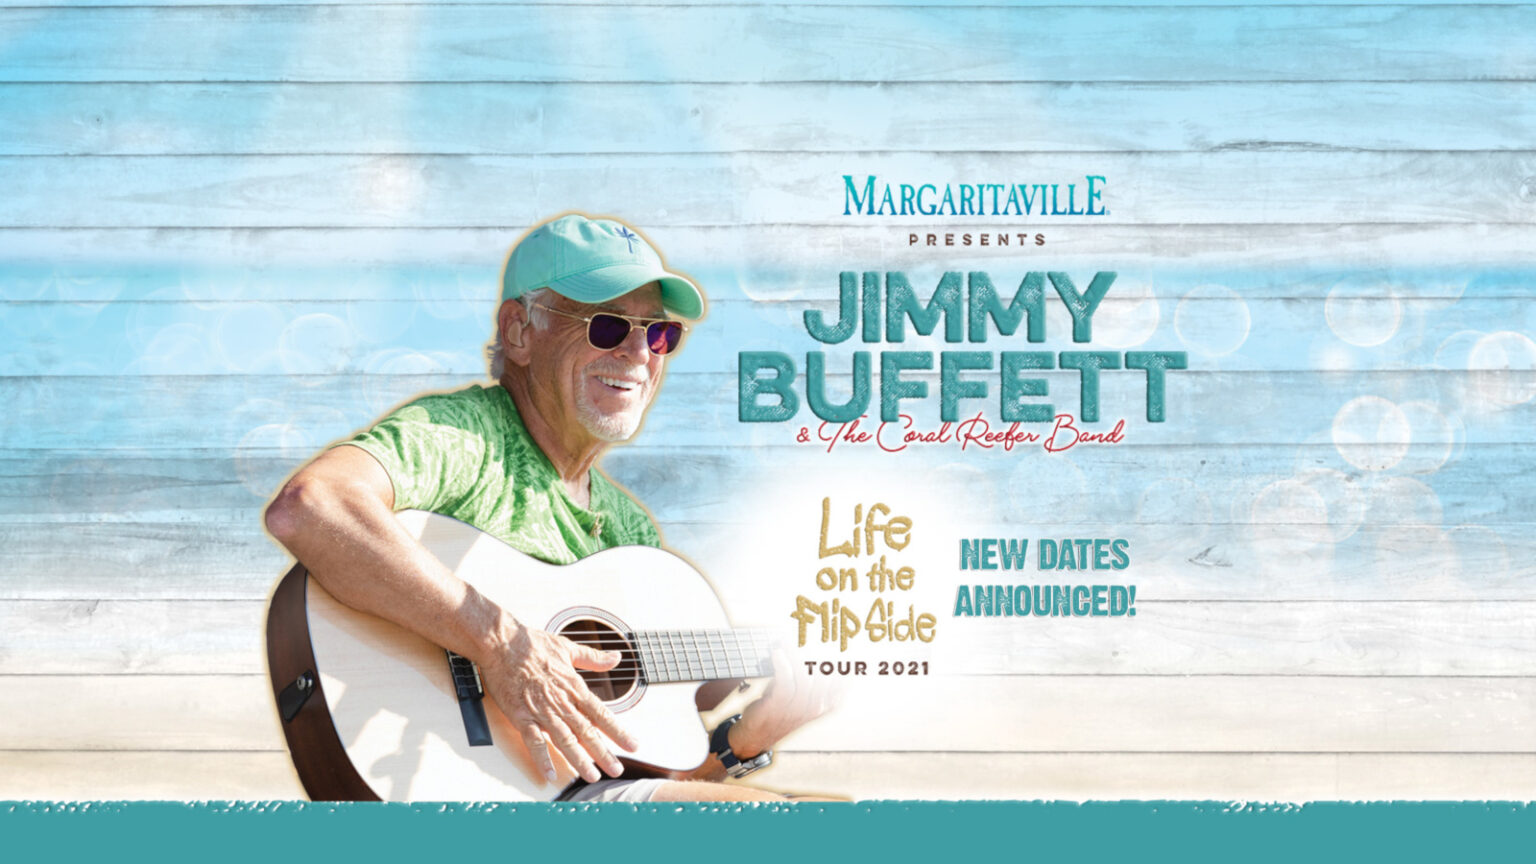 Calling all Parrot Heads! Jimmy Buffett is back on tour with the Coral Reefers! Snag your concert tickets to hear "Margaritaville" before they're sold out!